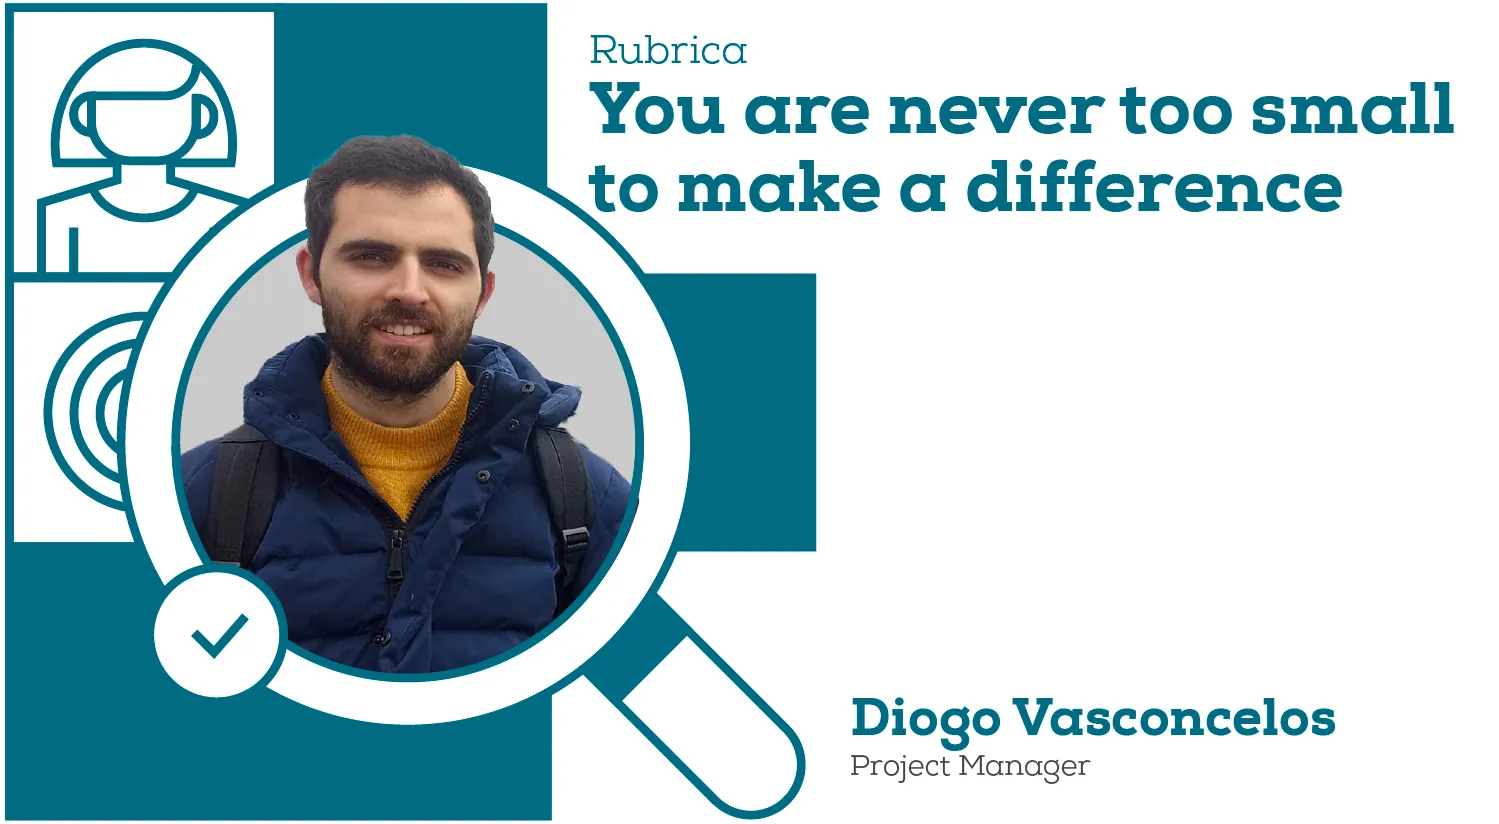 You are never too small to make a difference: Diogo Vasconcelos